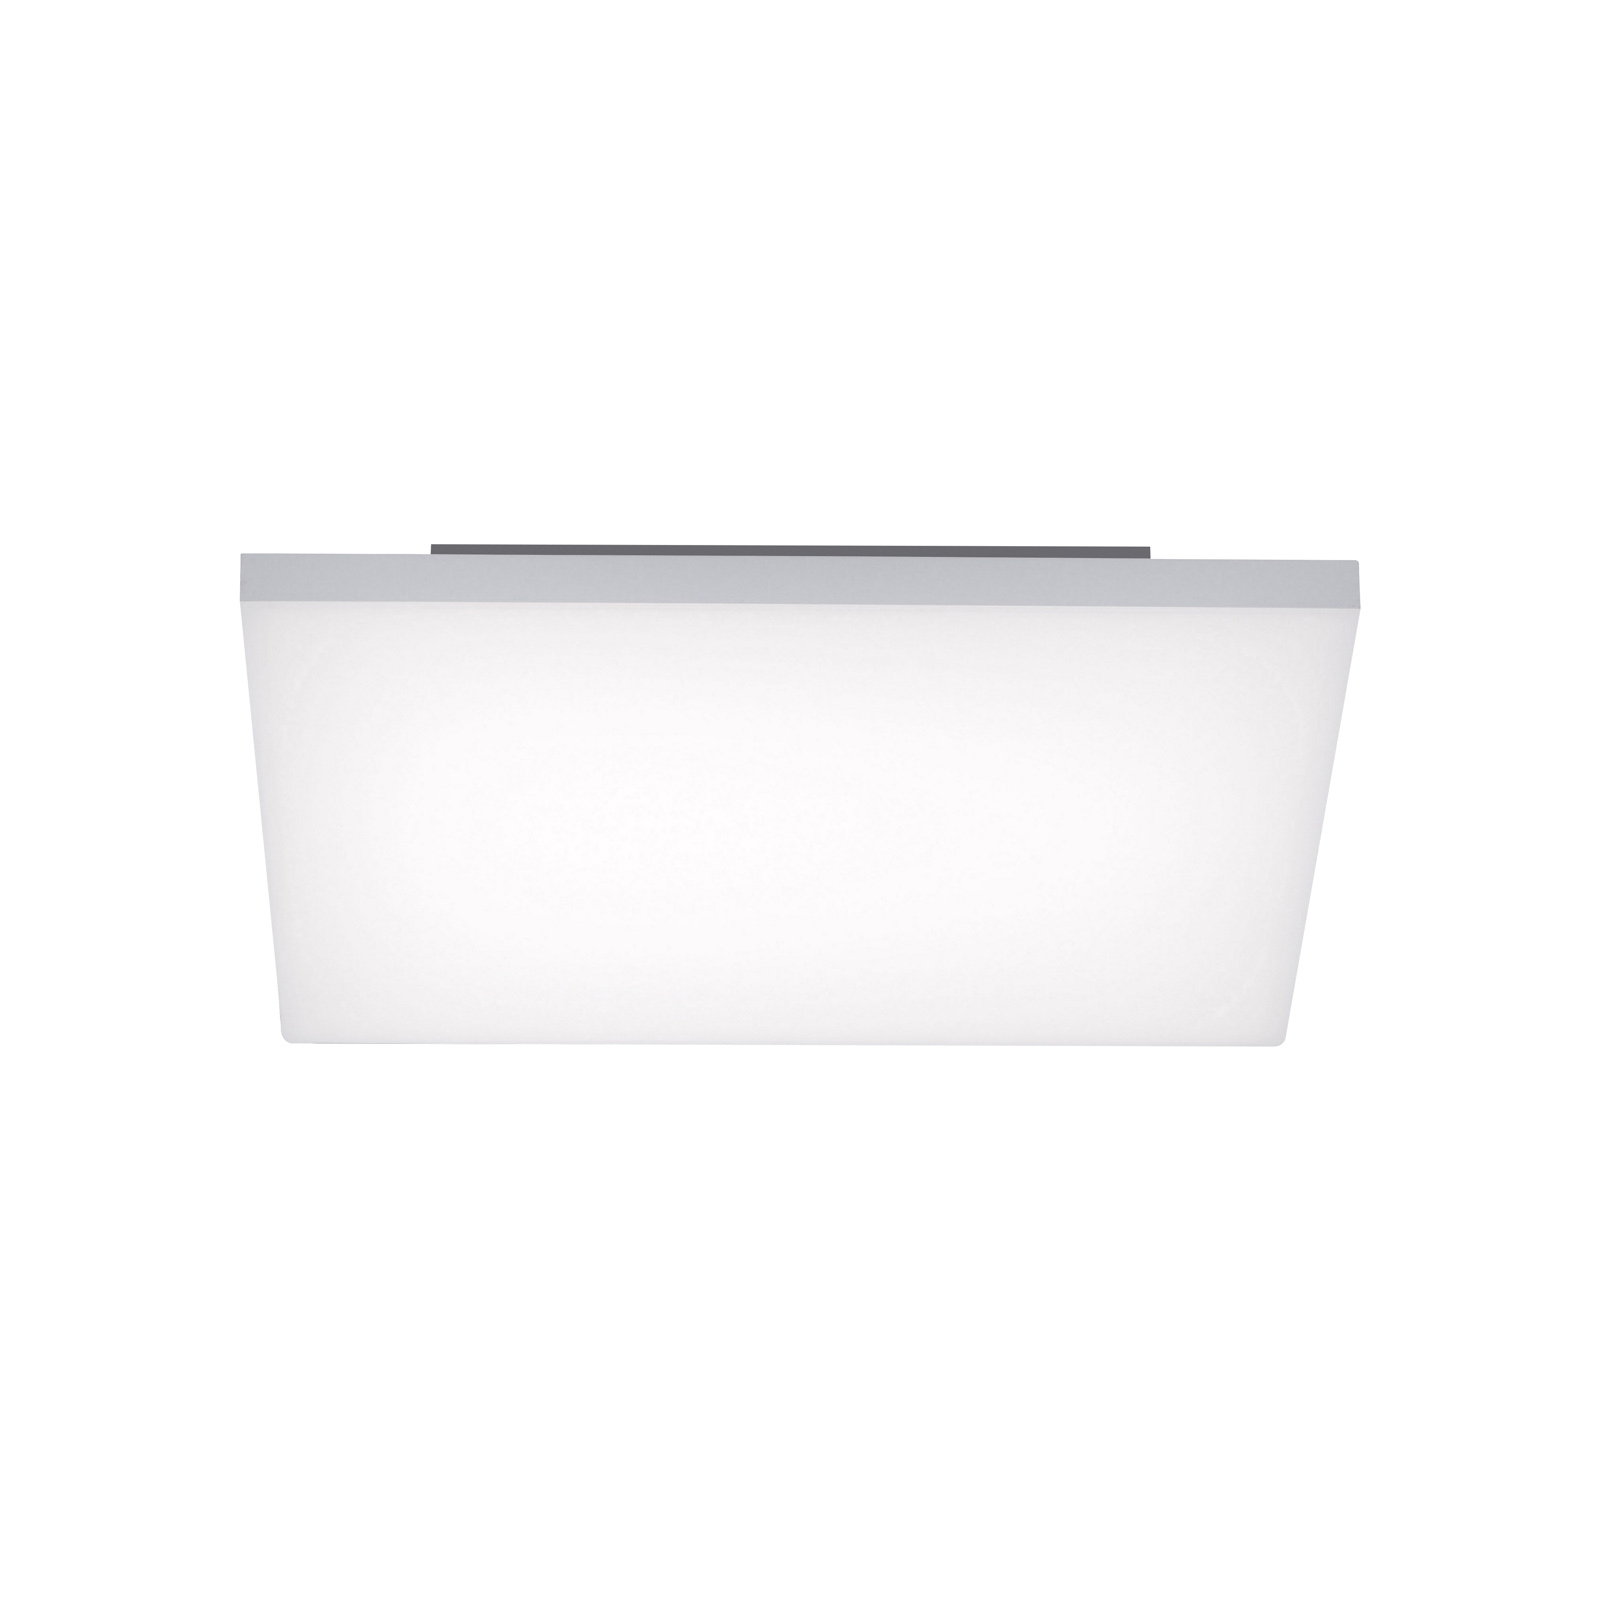 Canvas LED ceiling light, tunable white, 45 cm